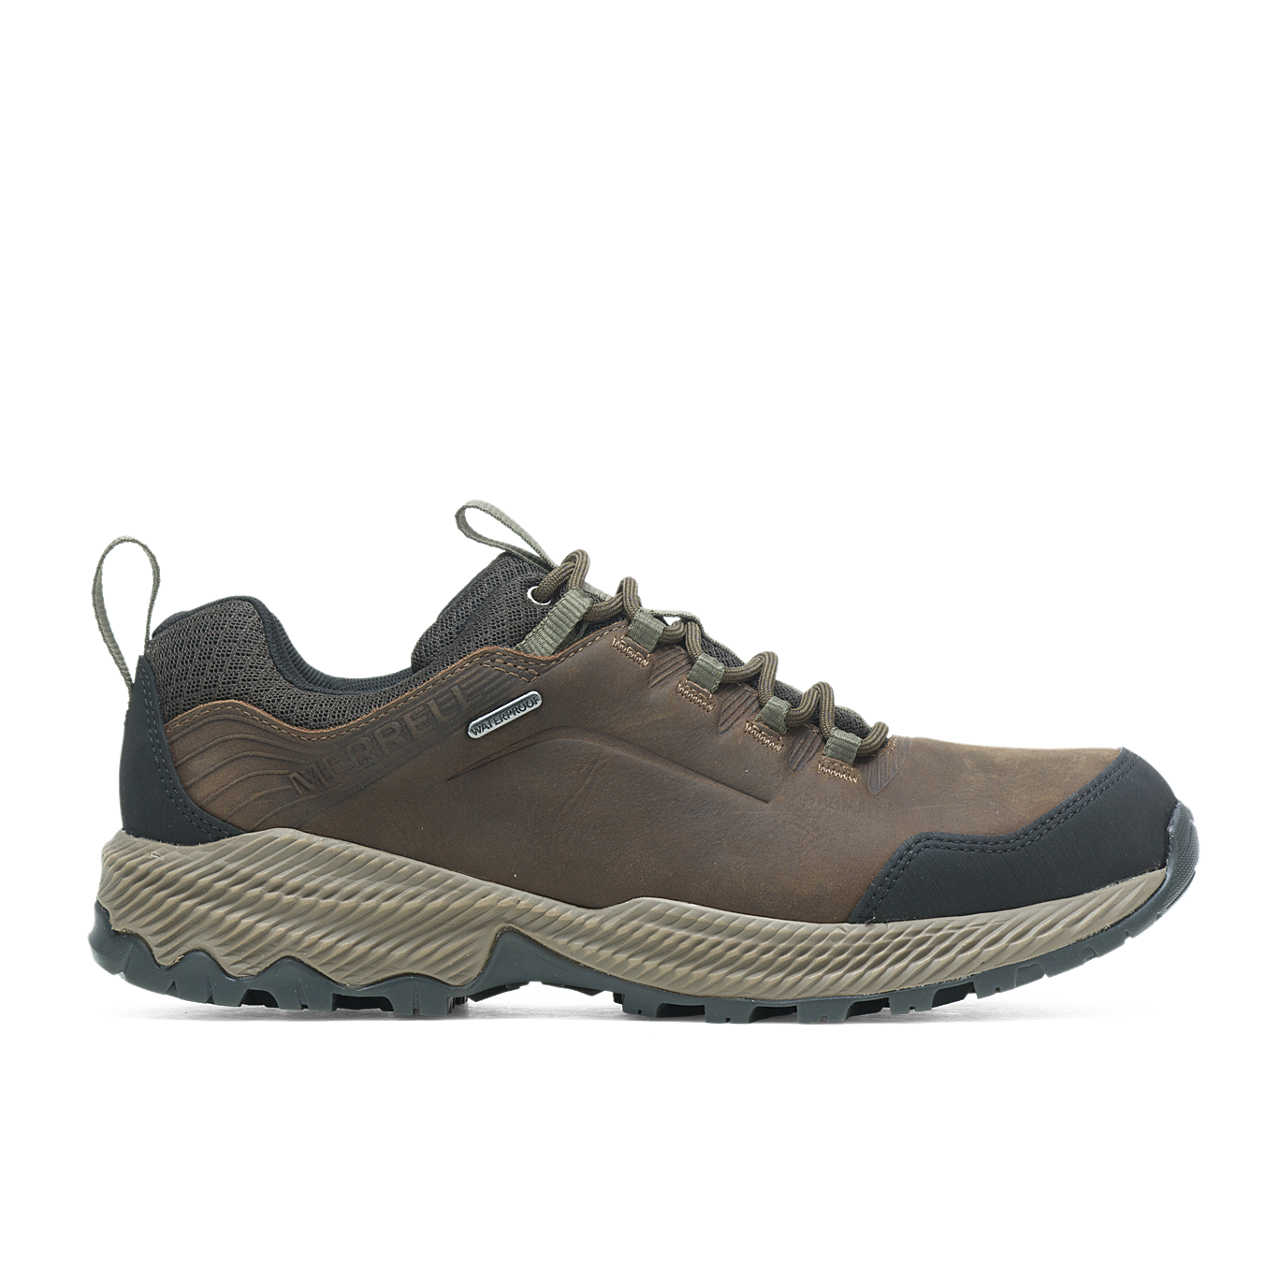 Men's Forestbound Waterproof Hiking Shoes | Merrell